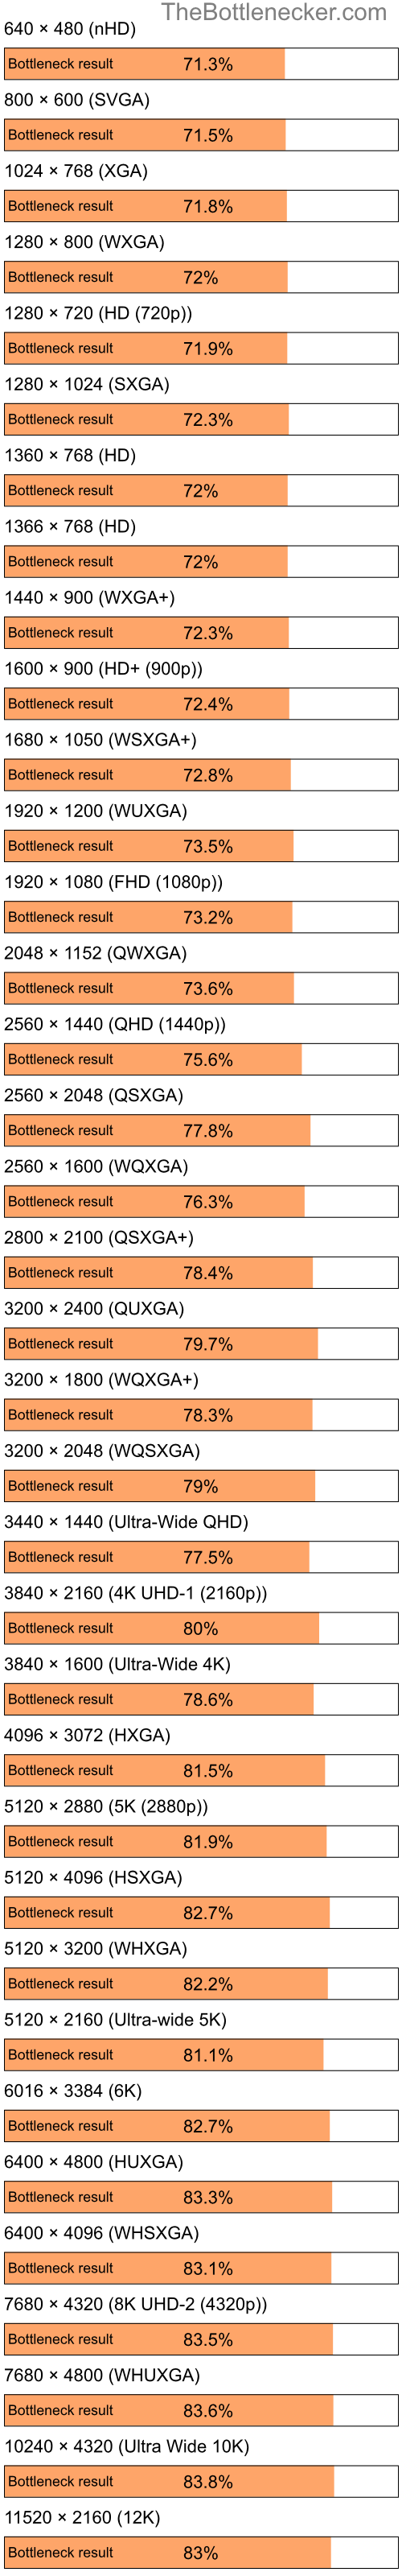 Bottleneck results by resolution for Intel Pentium 4 and NVIDIA GeForce 8600M GS in Graphic Card Intense Tasks